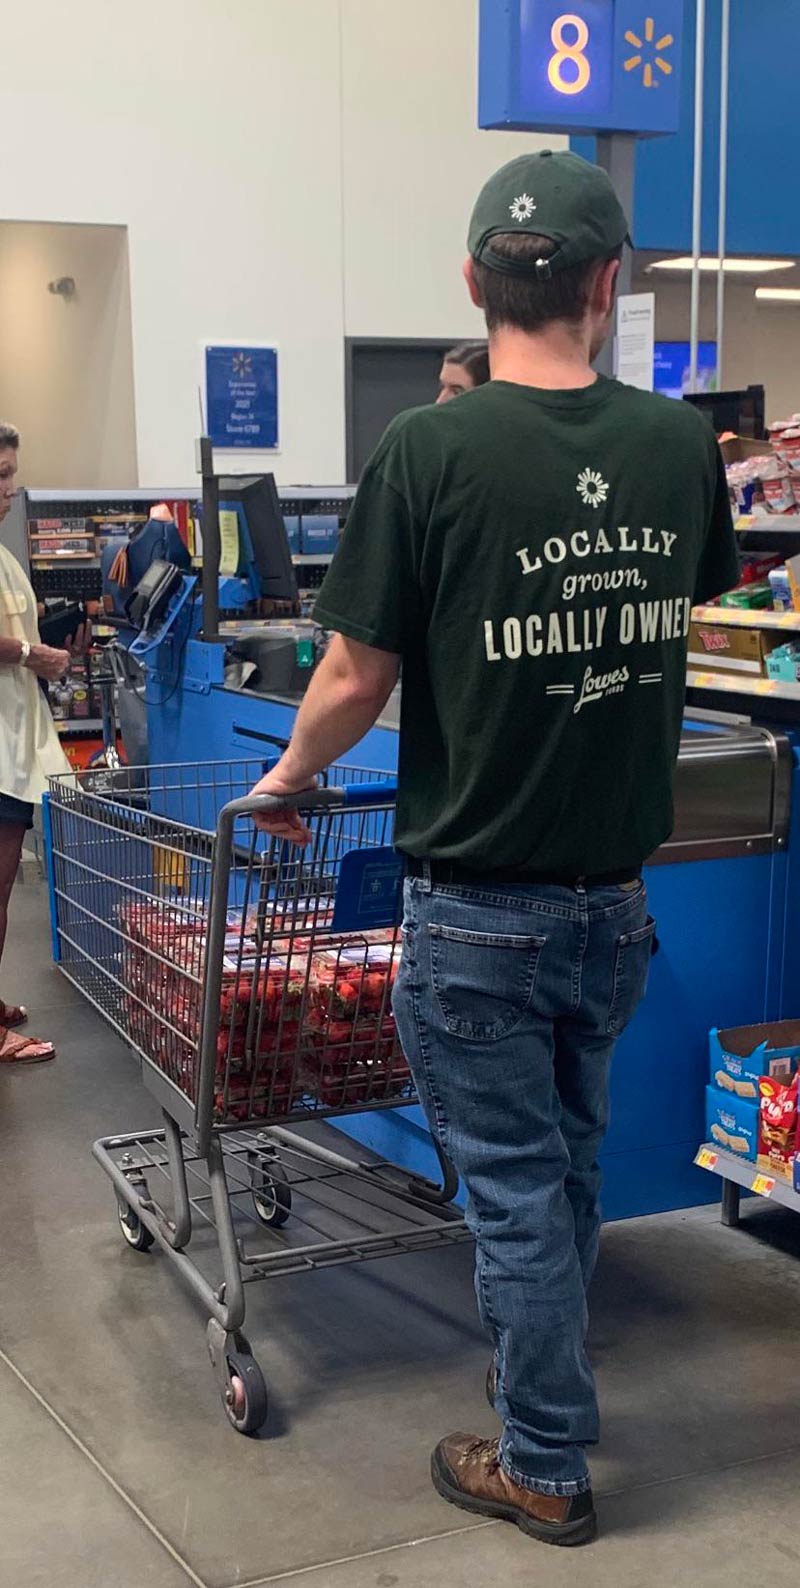 Suspicious: Employee from the grocery store across the street buying tons of strawberries from Walmart